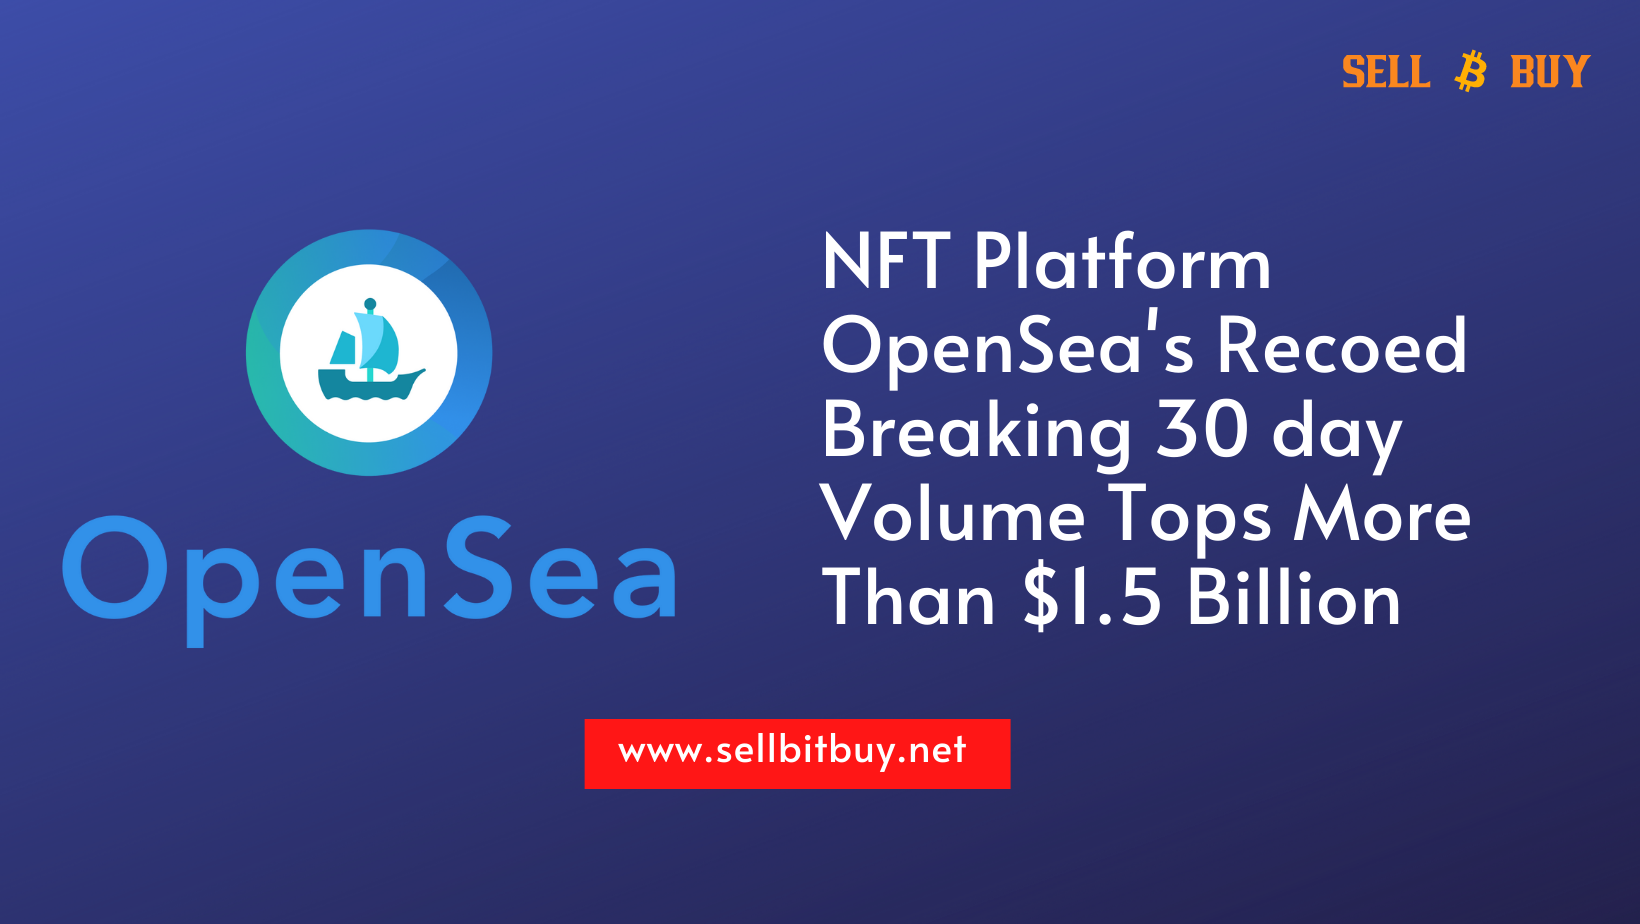 Article about NFT Platform OpenSea s Recoed Breaking 30 day Volume Tops More Than 1.5 Billion Dollars